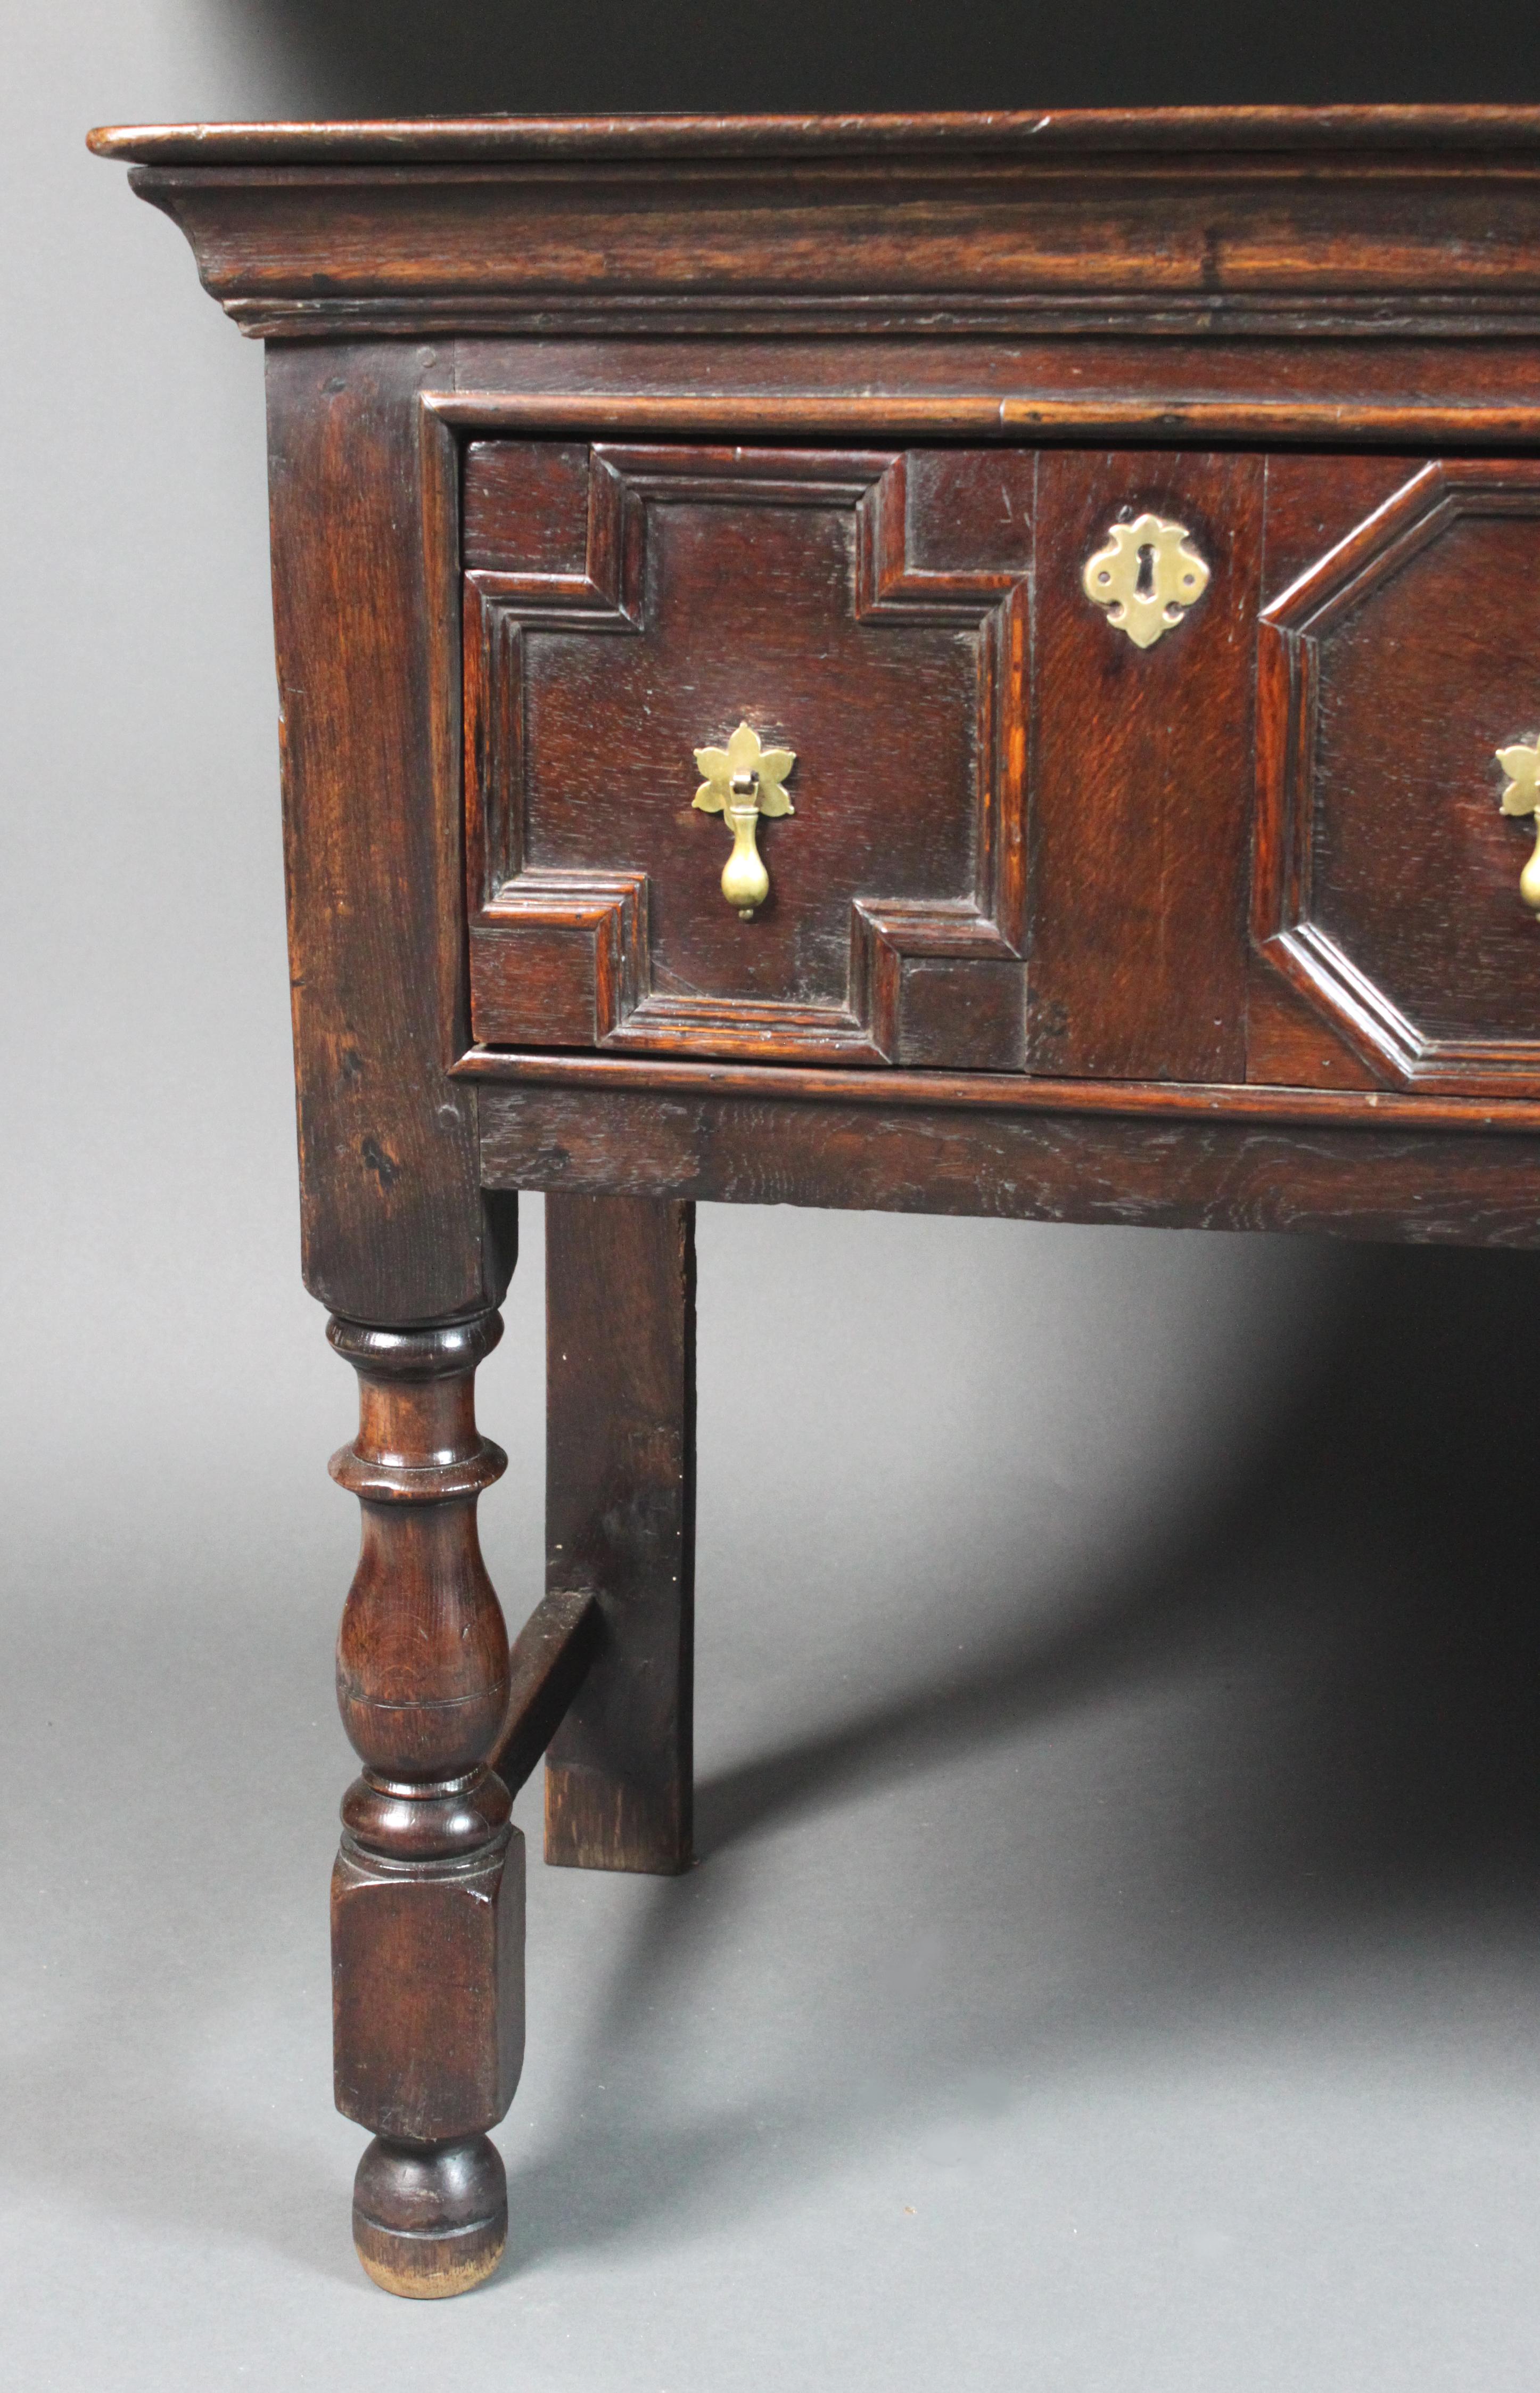 Molded 17th Century Oak Serving Dresser with Geometric Moulding on the Drawers